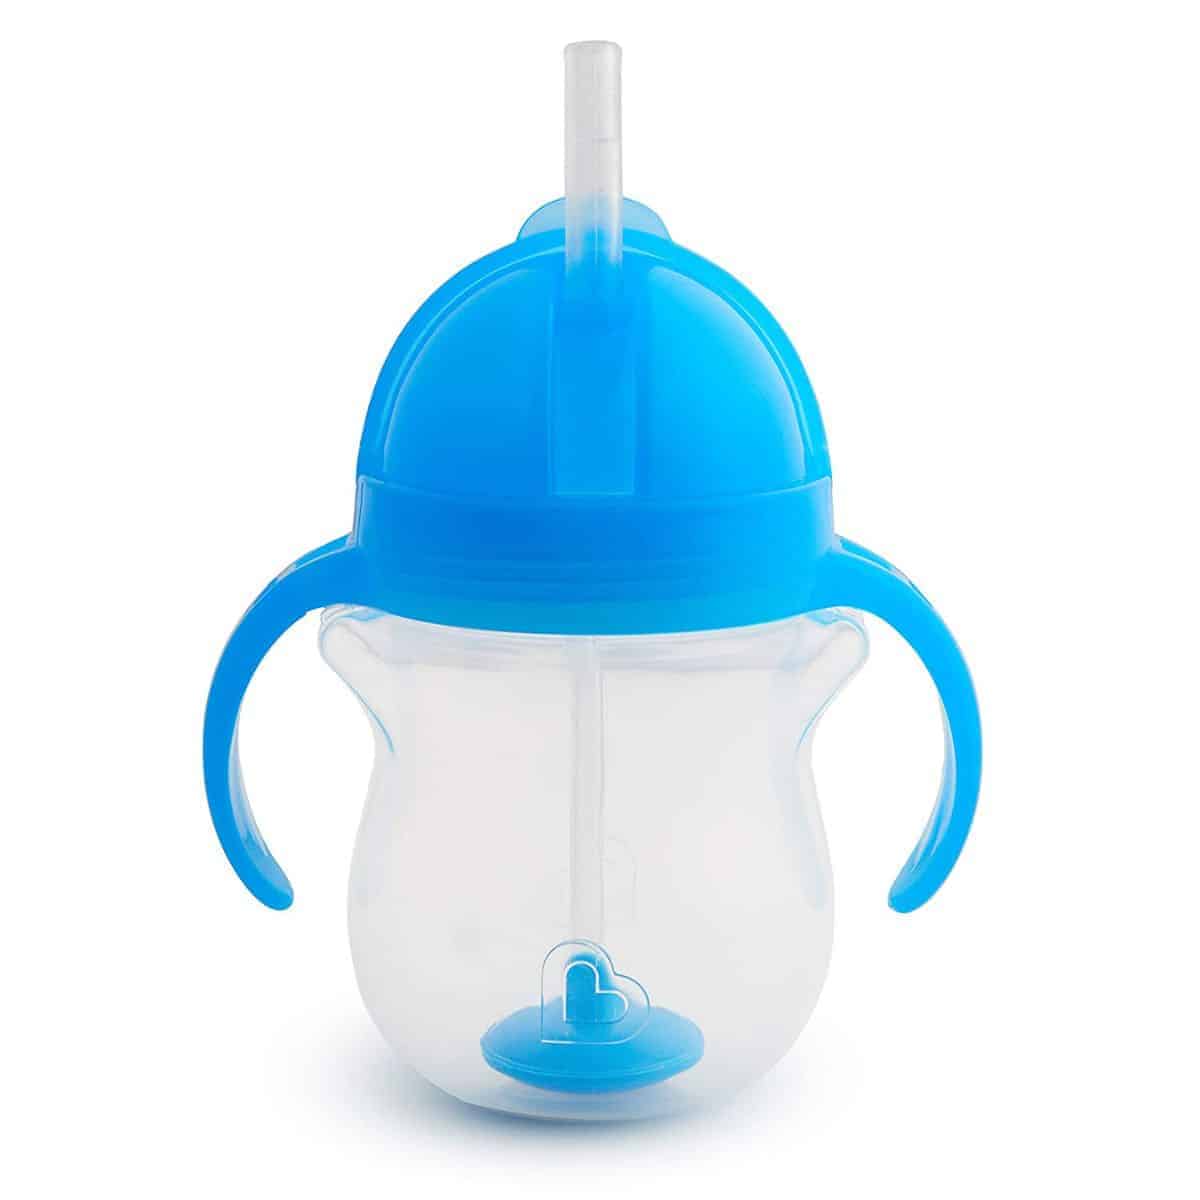 Do toddlers stop drinking milk? How much milk does a 1 year old need? Or, a 2 year old?  Get the answer, plus the best sippy cup for milk!